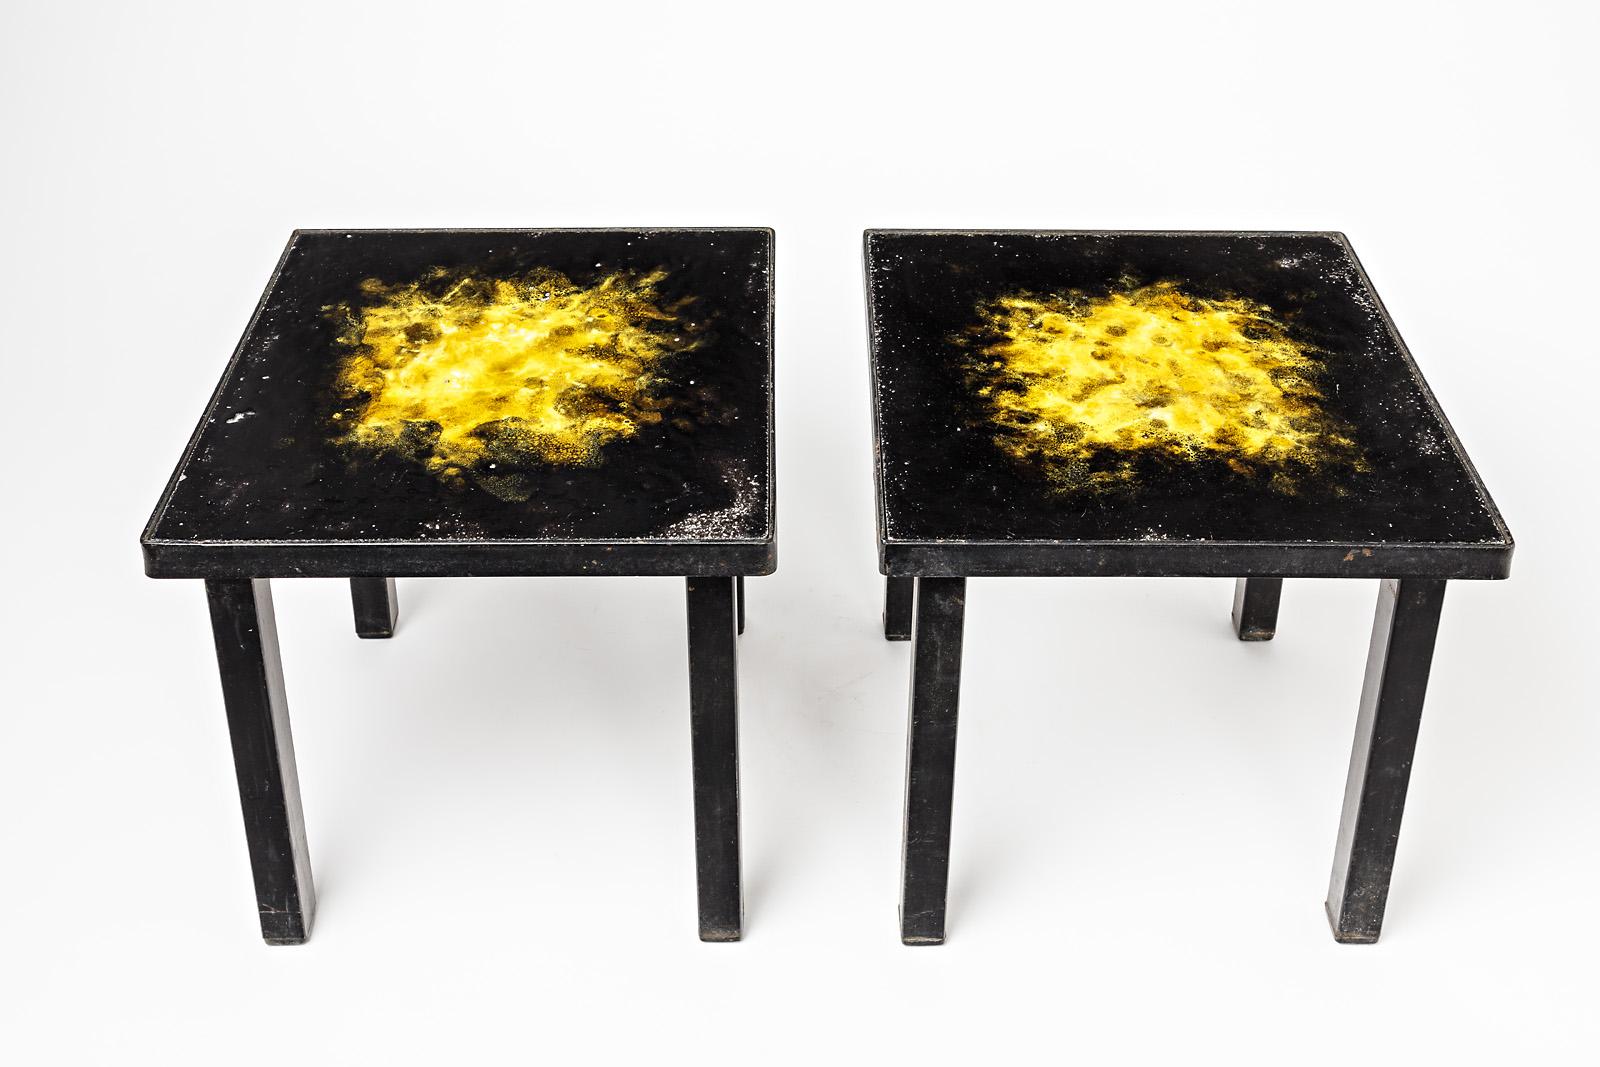 Pair of low coffee tables.

Ceramic low tables with shinny black and yellow ceramic glazes.

Metal feet in black color.

Original perfect conditions.

Realized circa 1970.

Dimensions: 30 x 30 x 30 cm each.

 